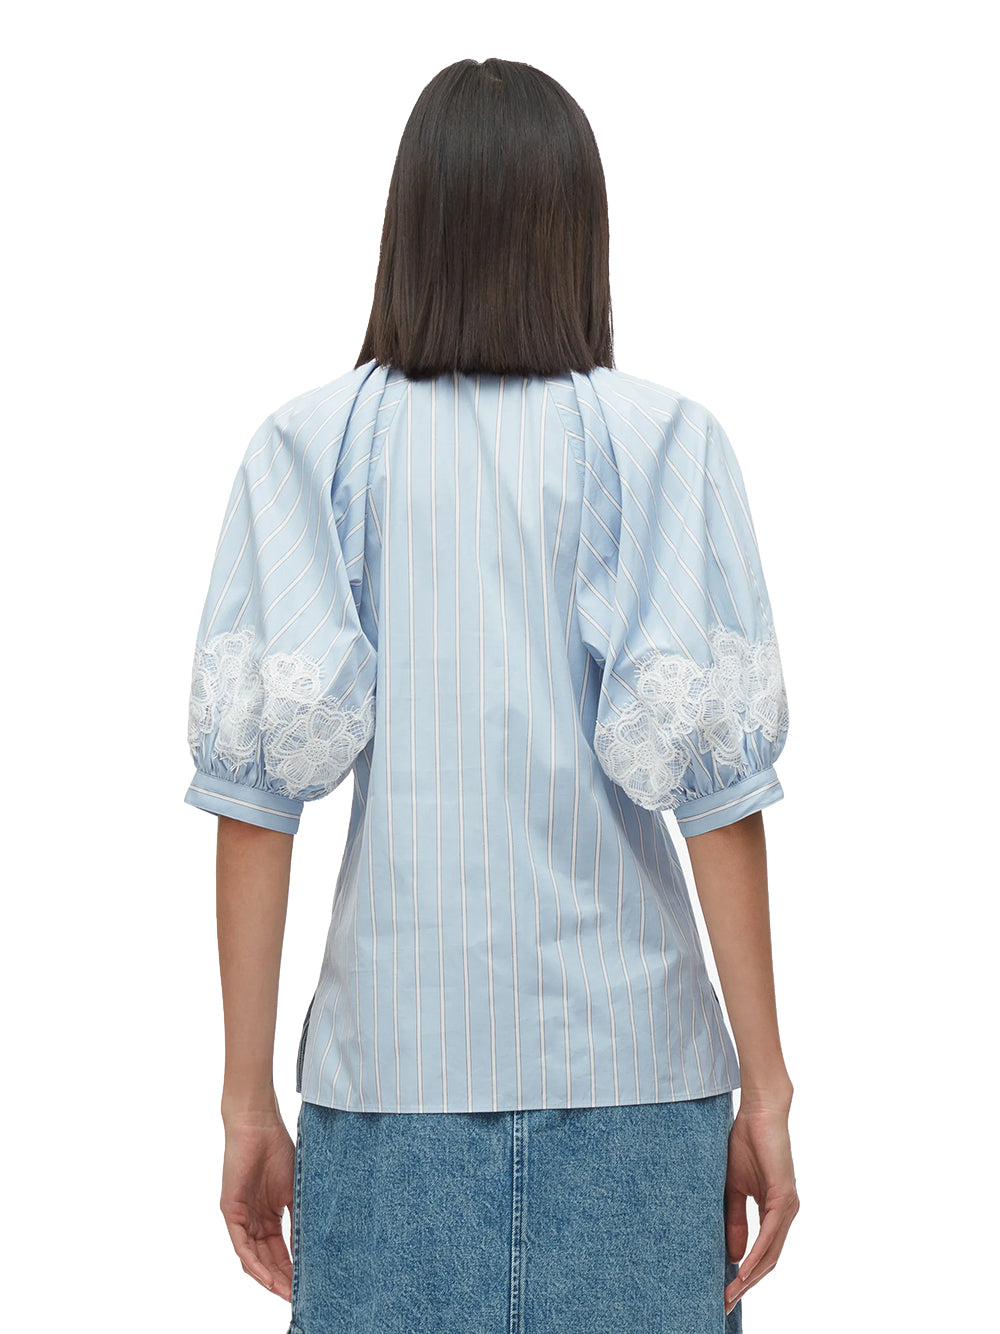 Lantern Sleeve Shirt with Lace (Oxford Blue)